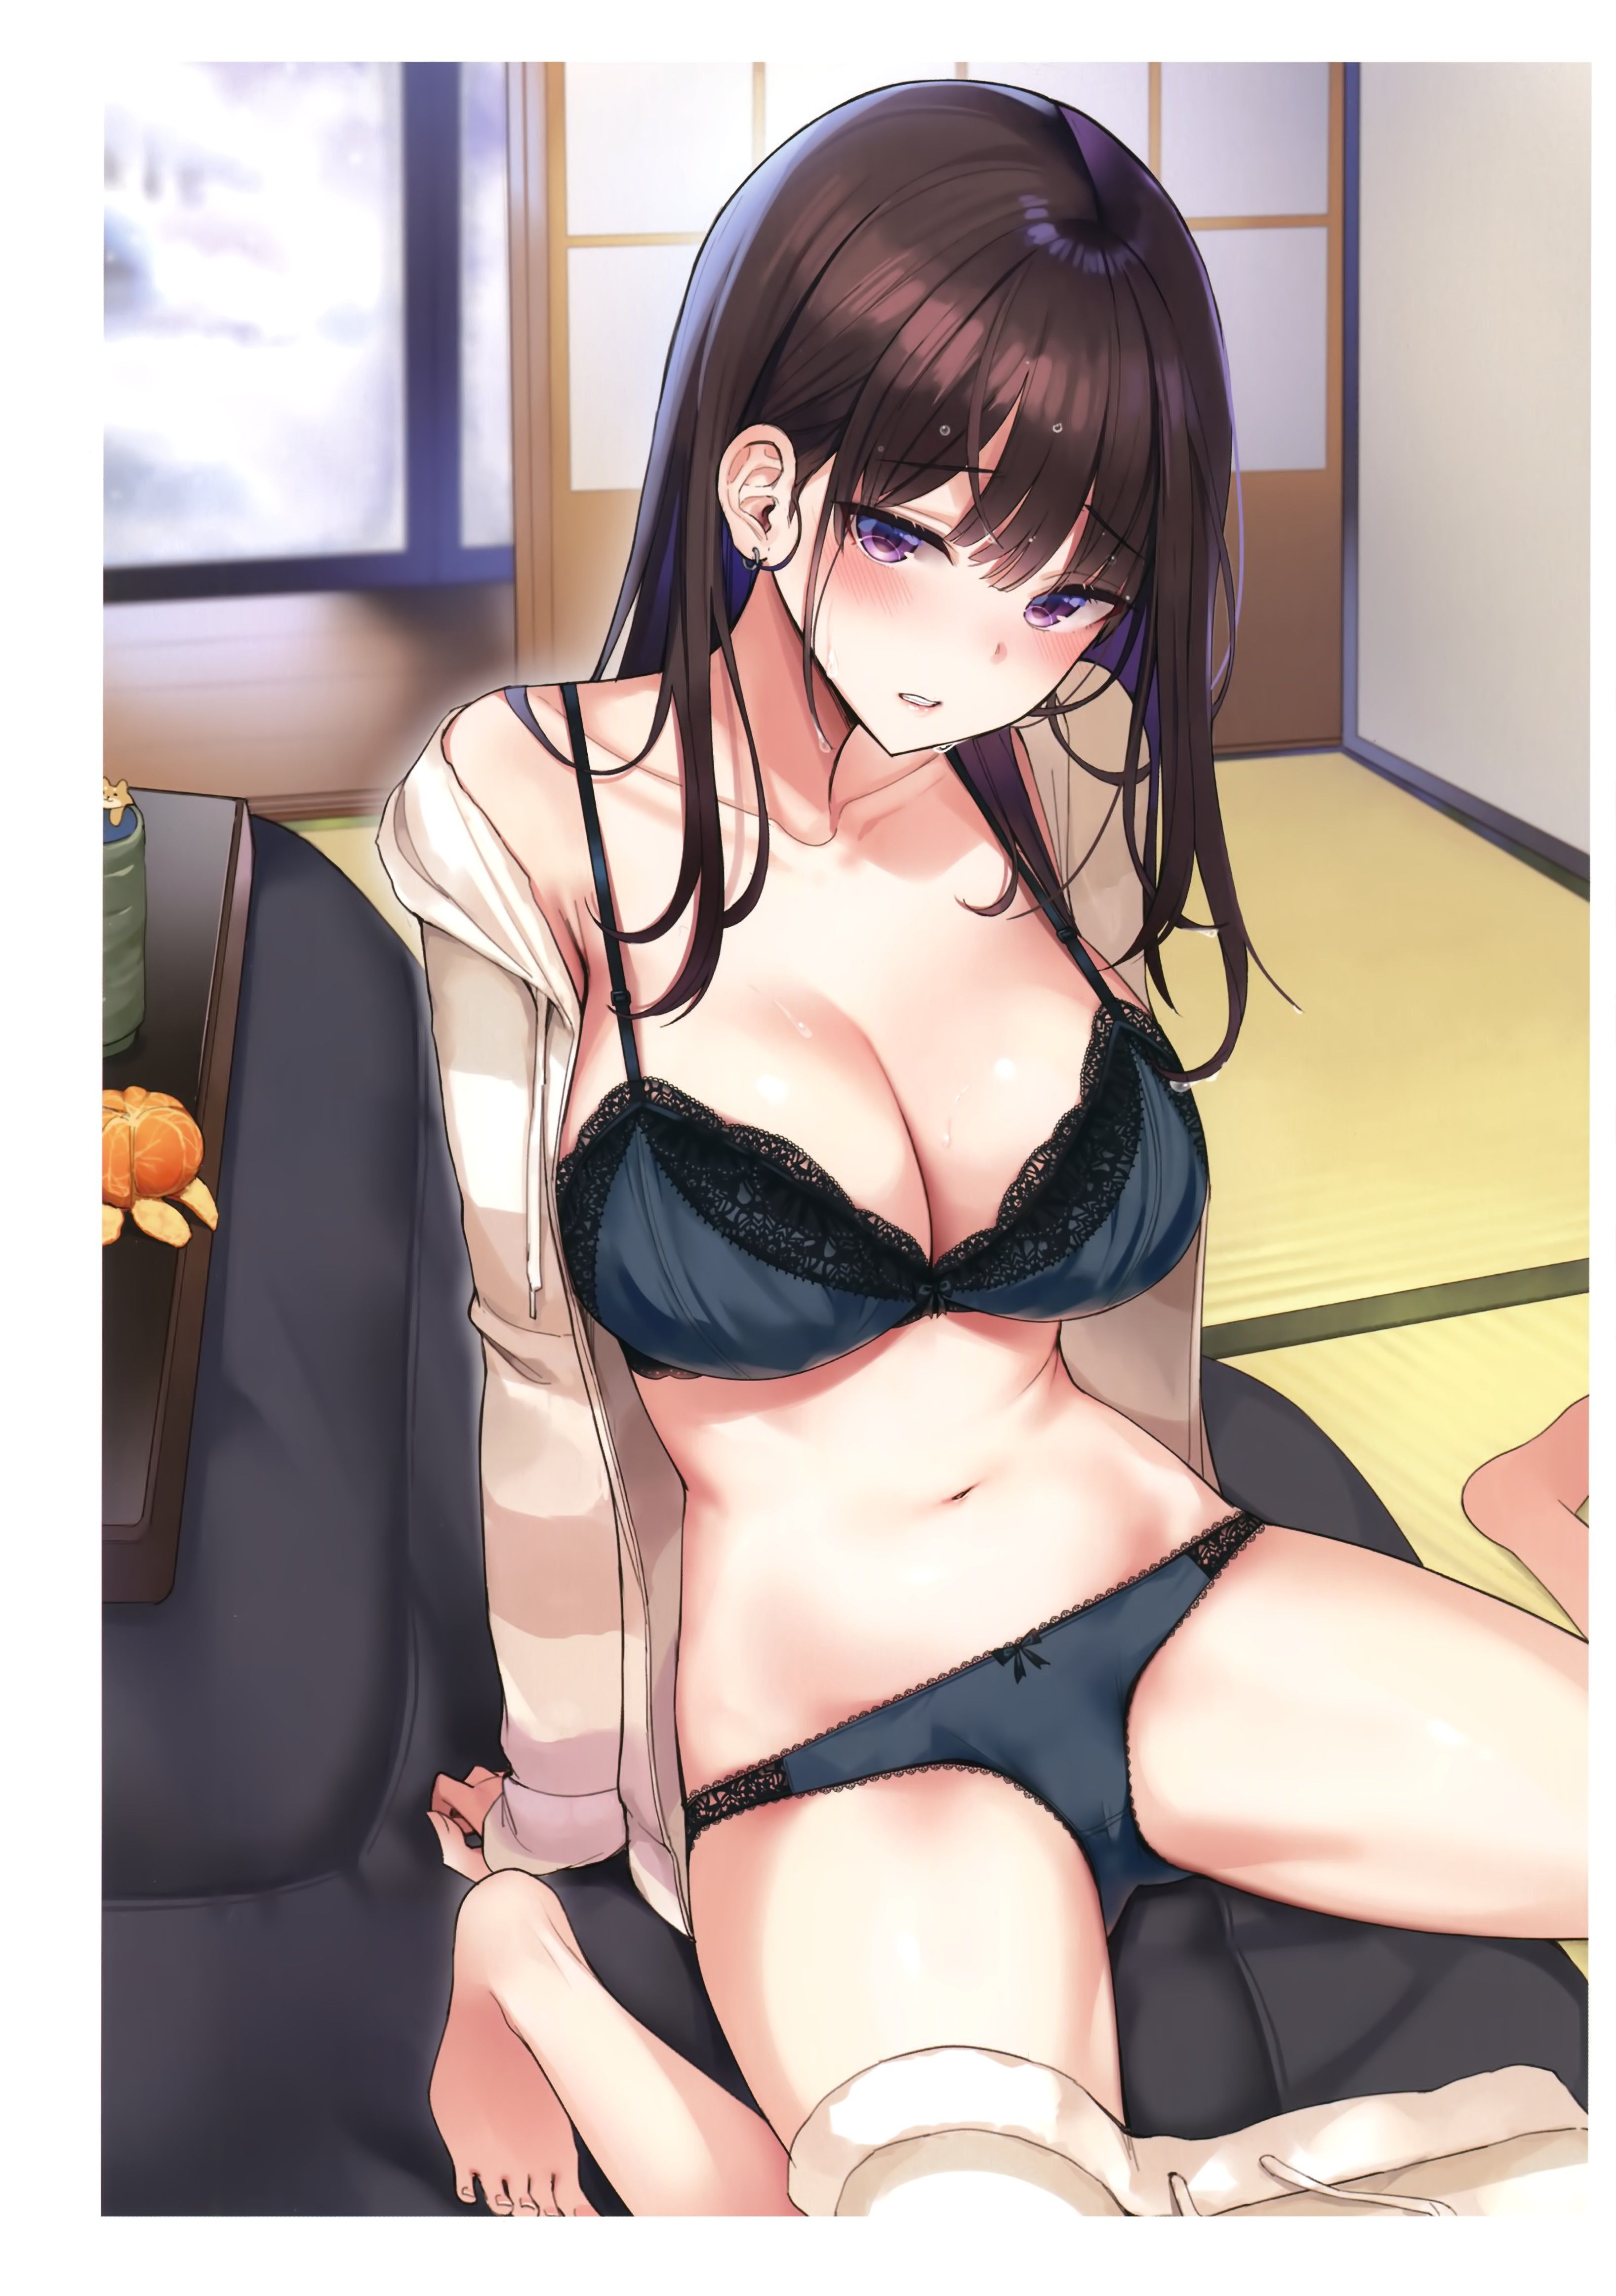 [2nd] Erotic image of a girl with a shy expression Part 72 17